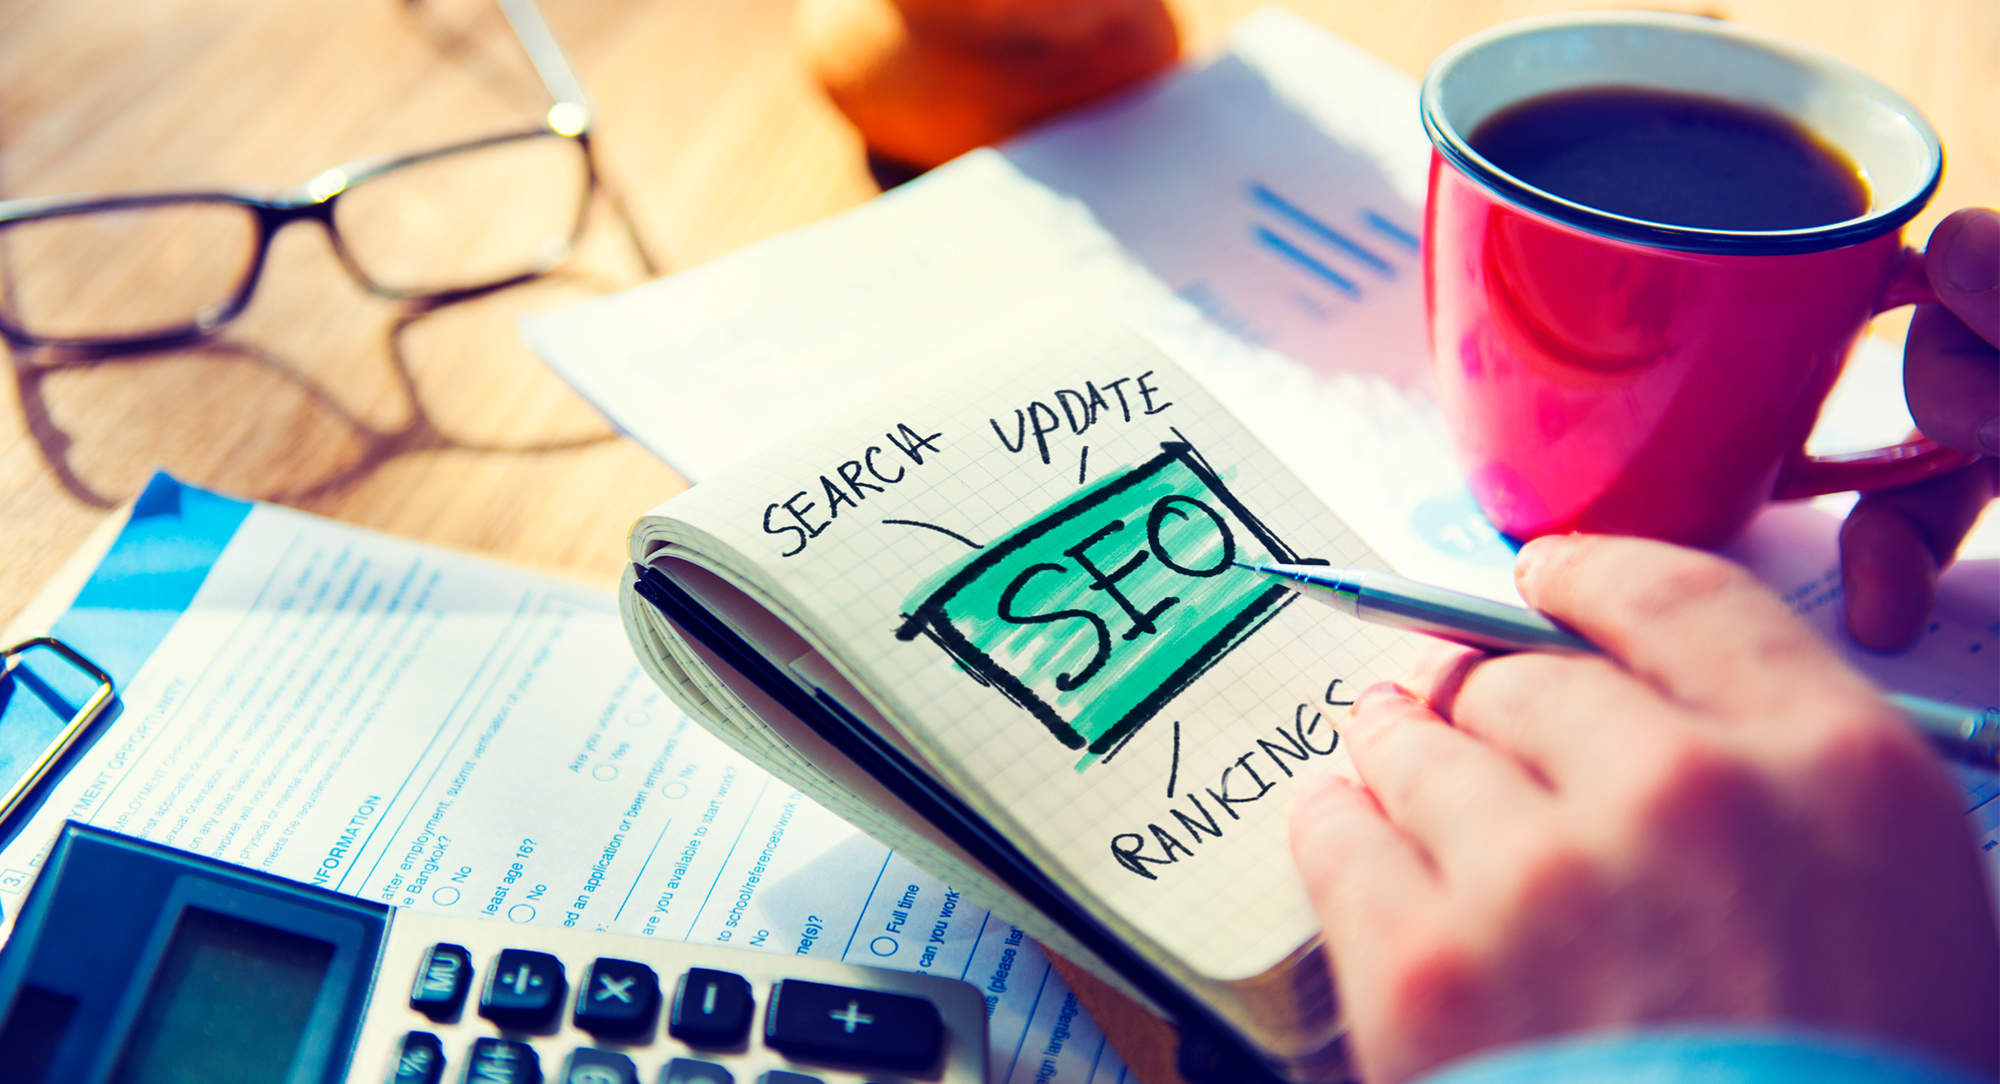 10 Questions to Ask When Hiring an SEO Expert